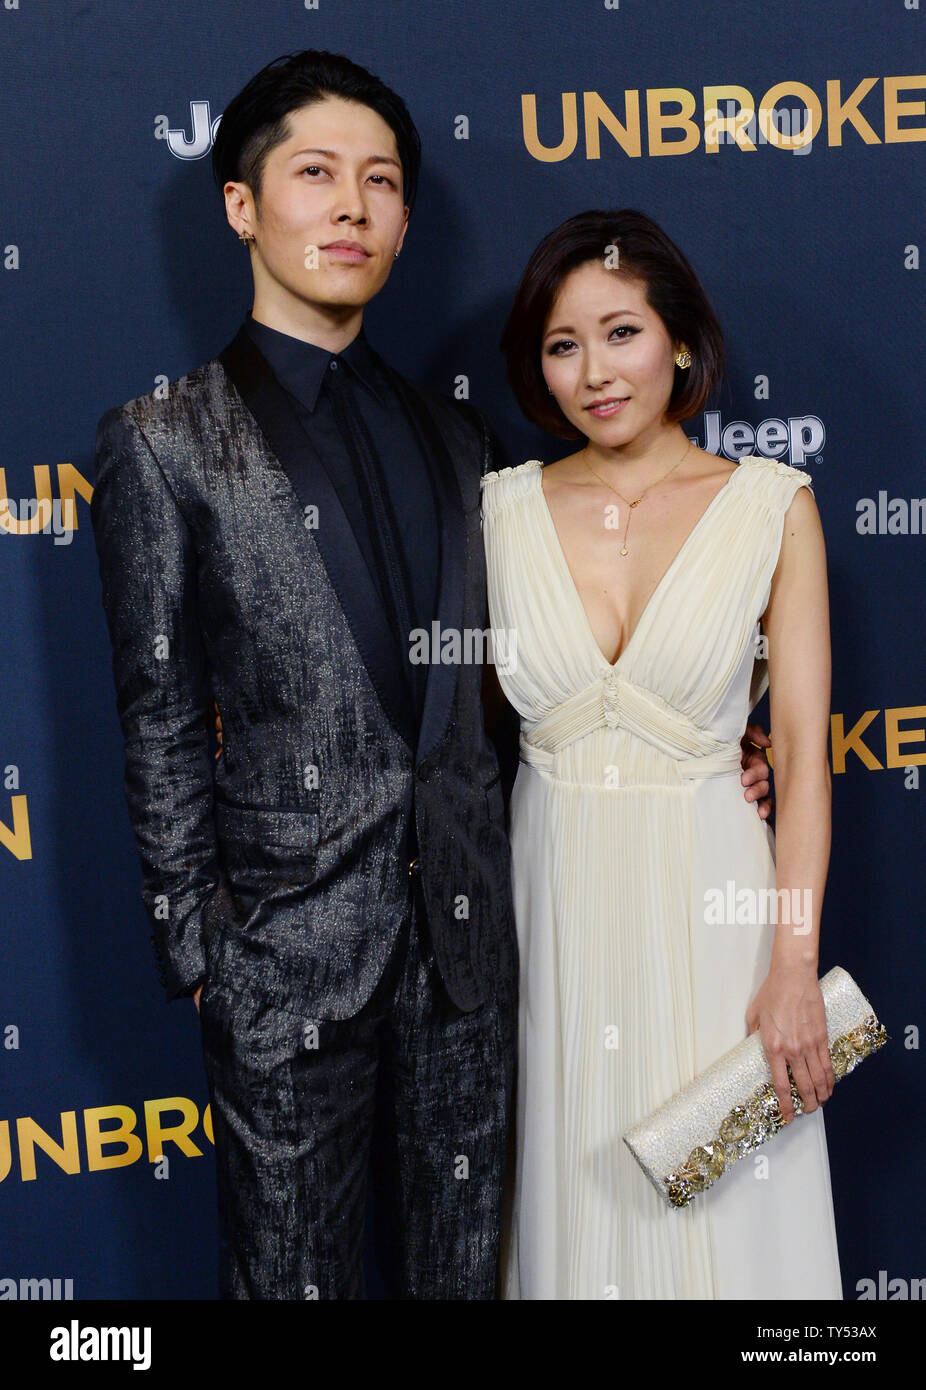 Cast member Takamasa Ishihara aka 'Miyavi' and his wife, pop singer Miyuki Ishihara attend the premiere of the biographical motion picture war drama "Unbroken" at the Dolby Theatre in the Hollywood section of Los Angeles on December 15, 2014. Storyline: After a near-fatal plane crash in WWII, Olympian Louis Zamperini spends a harrowing 47 days in a raft with two fellow crewmen before he's caught by the Japanese navy and sent to a prisoner-of-war camp.  UPI/Jim Ruymen Stock Photo